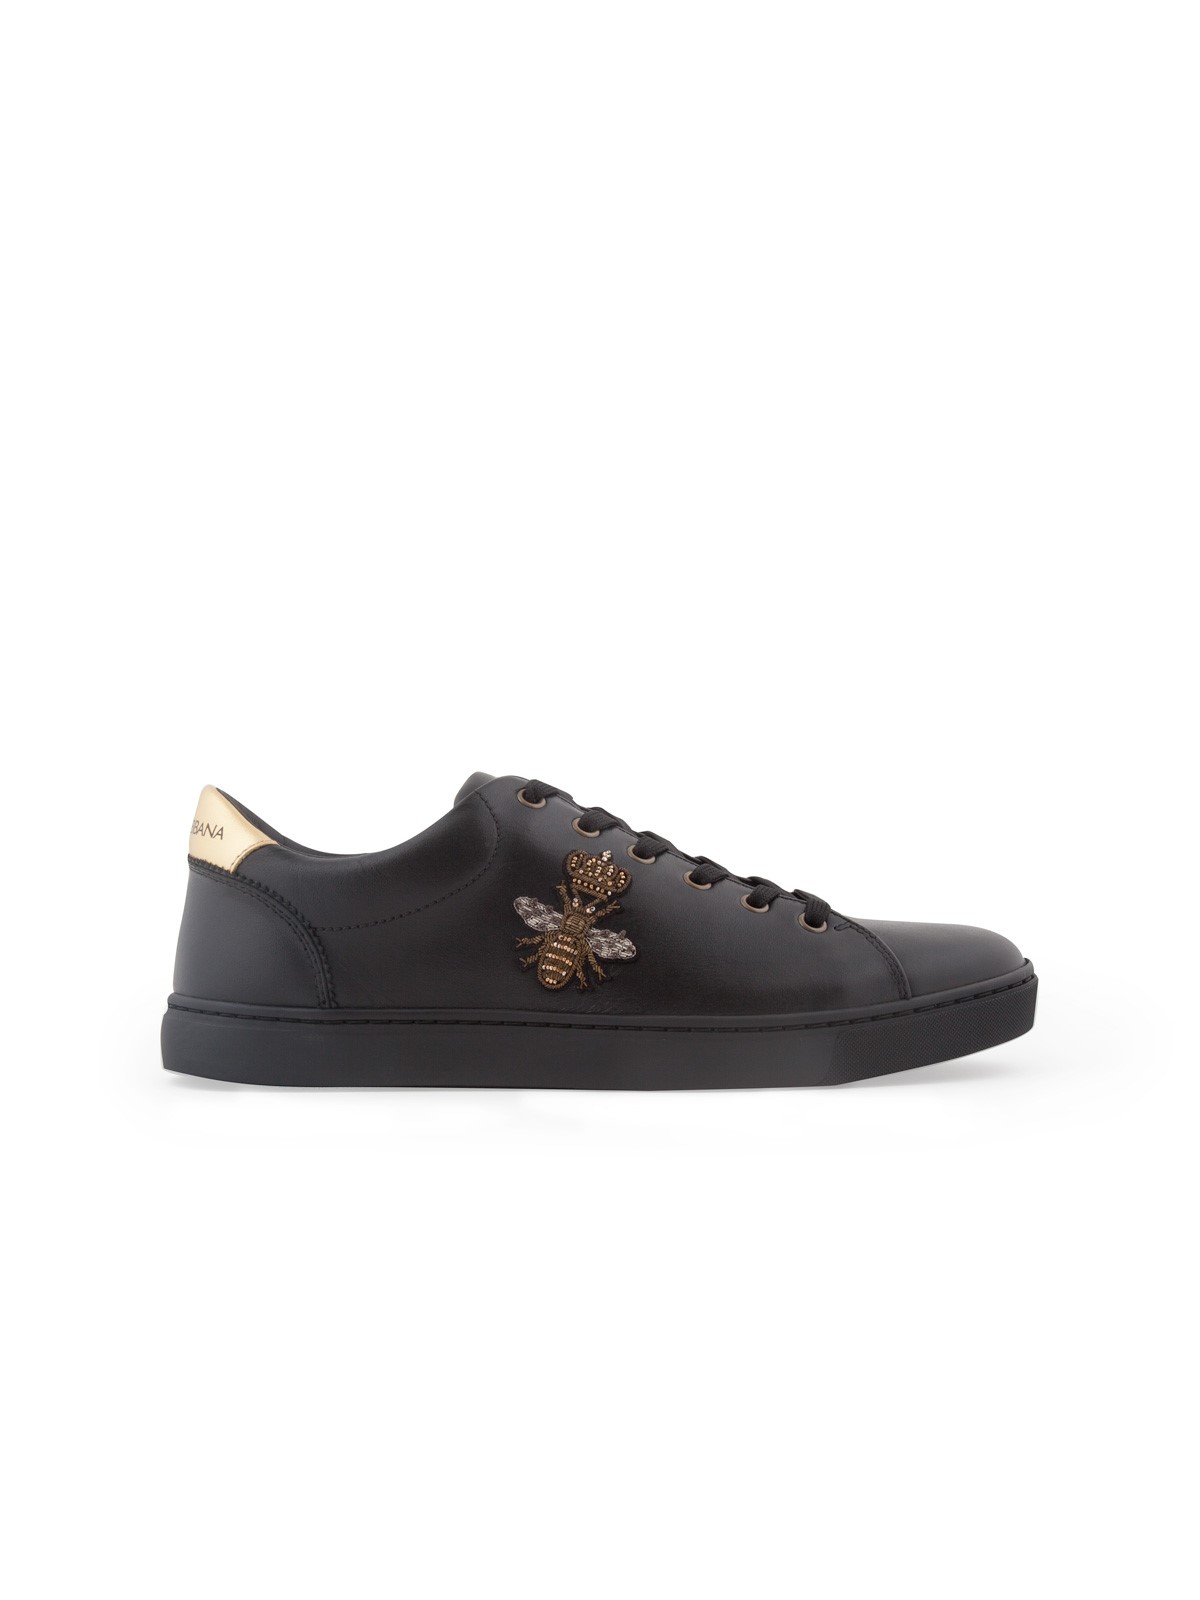 dolce & gabbana EMBROIDERED BEE SNEAKERS available on montiboutique.com ...